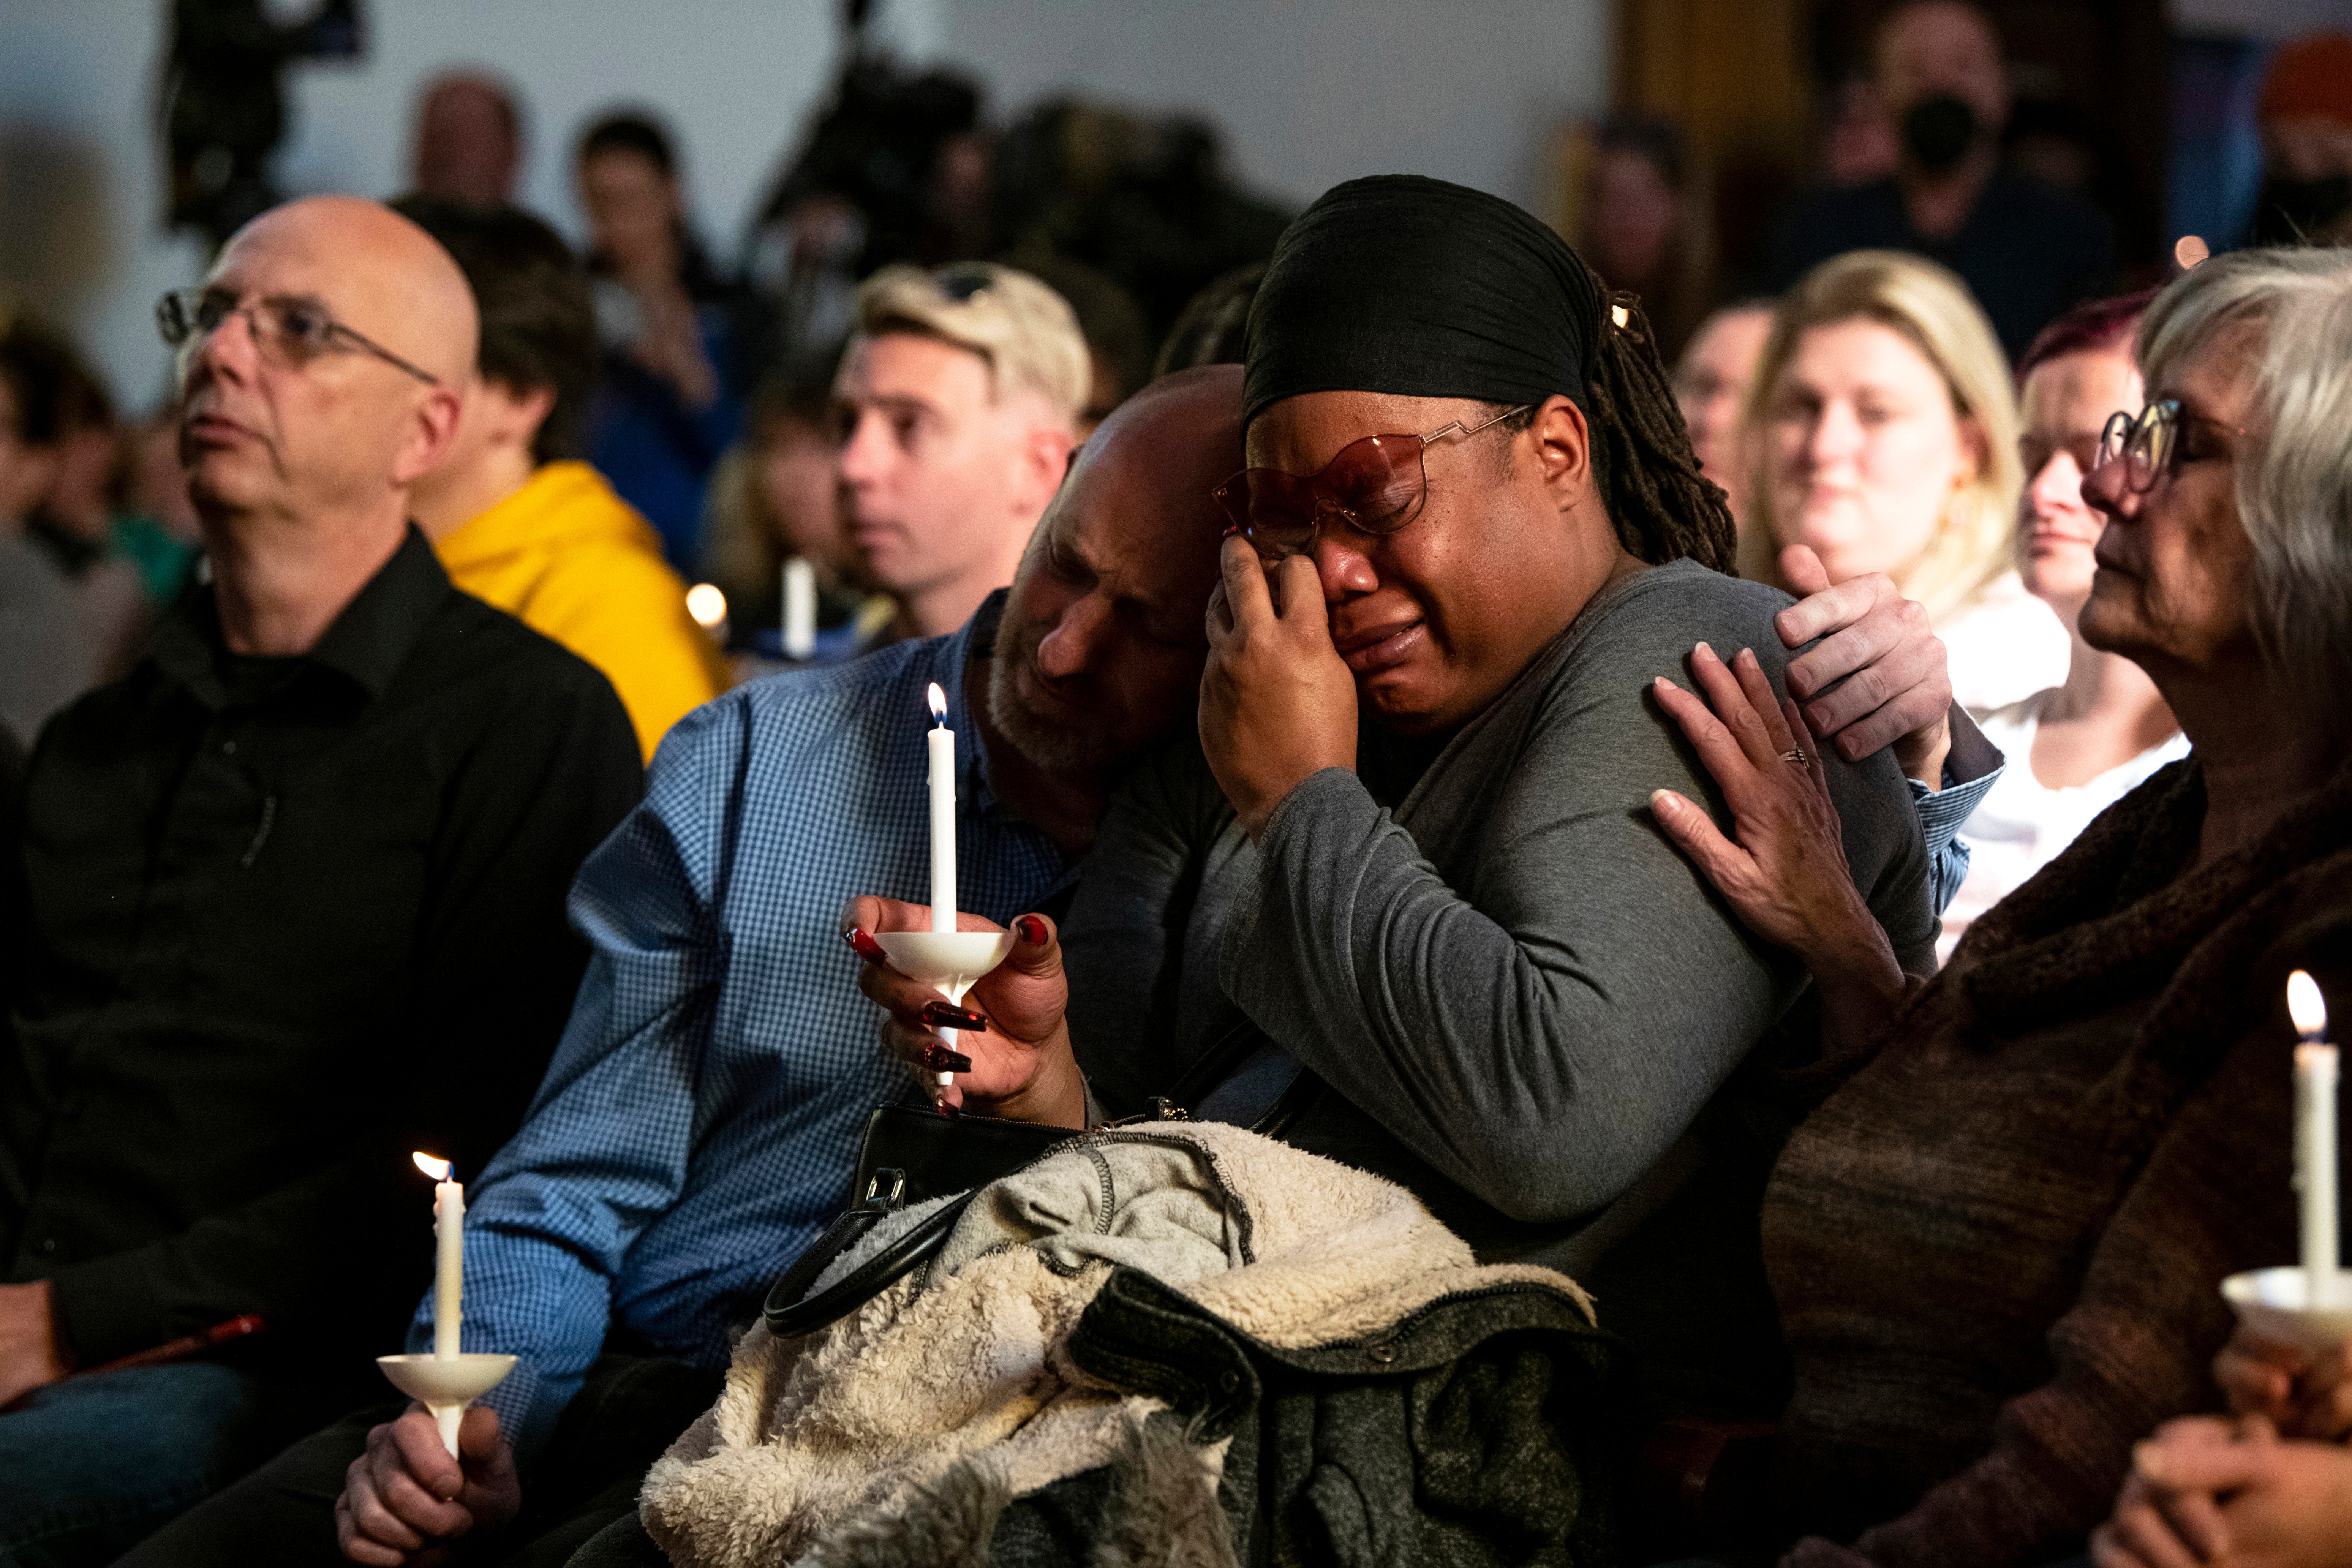 Police say the mass shooting bore all the hallmarks of a hate crime